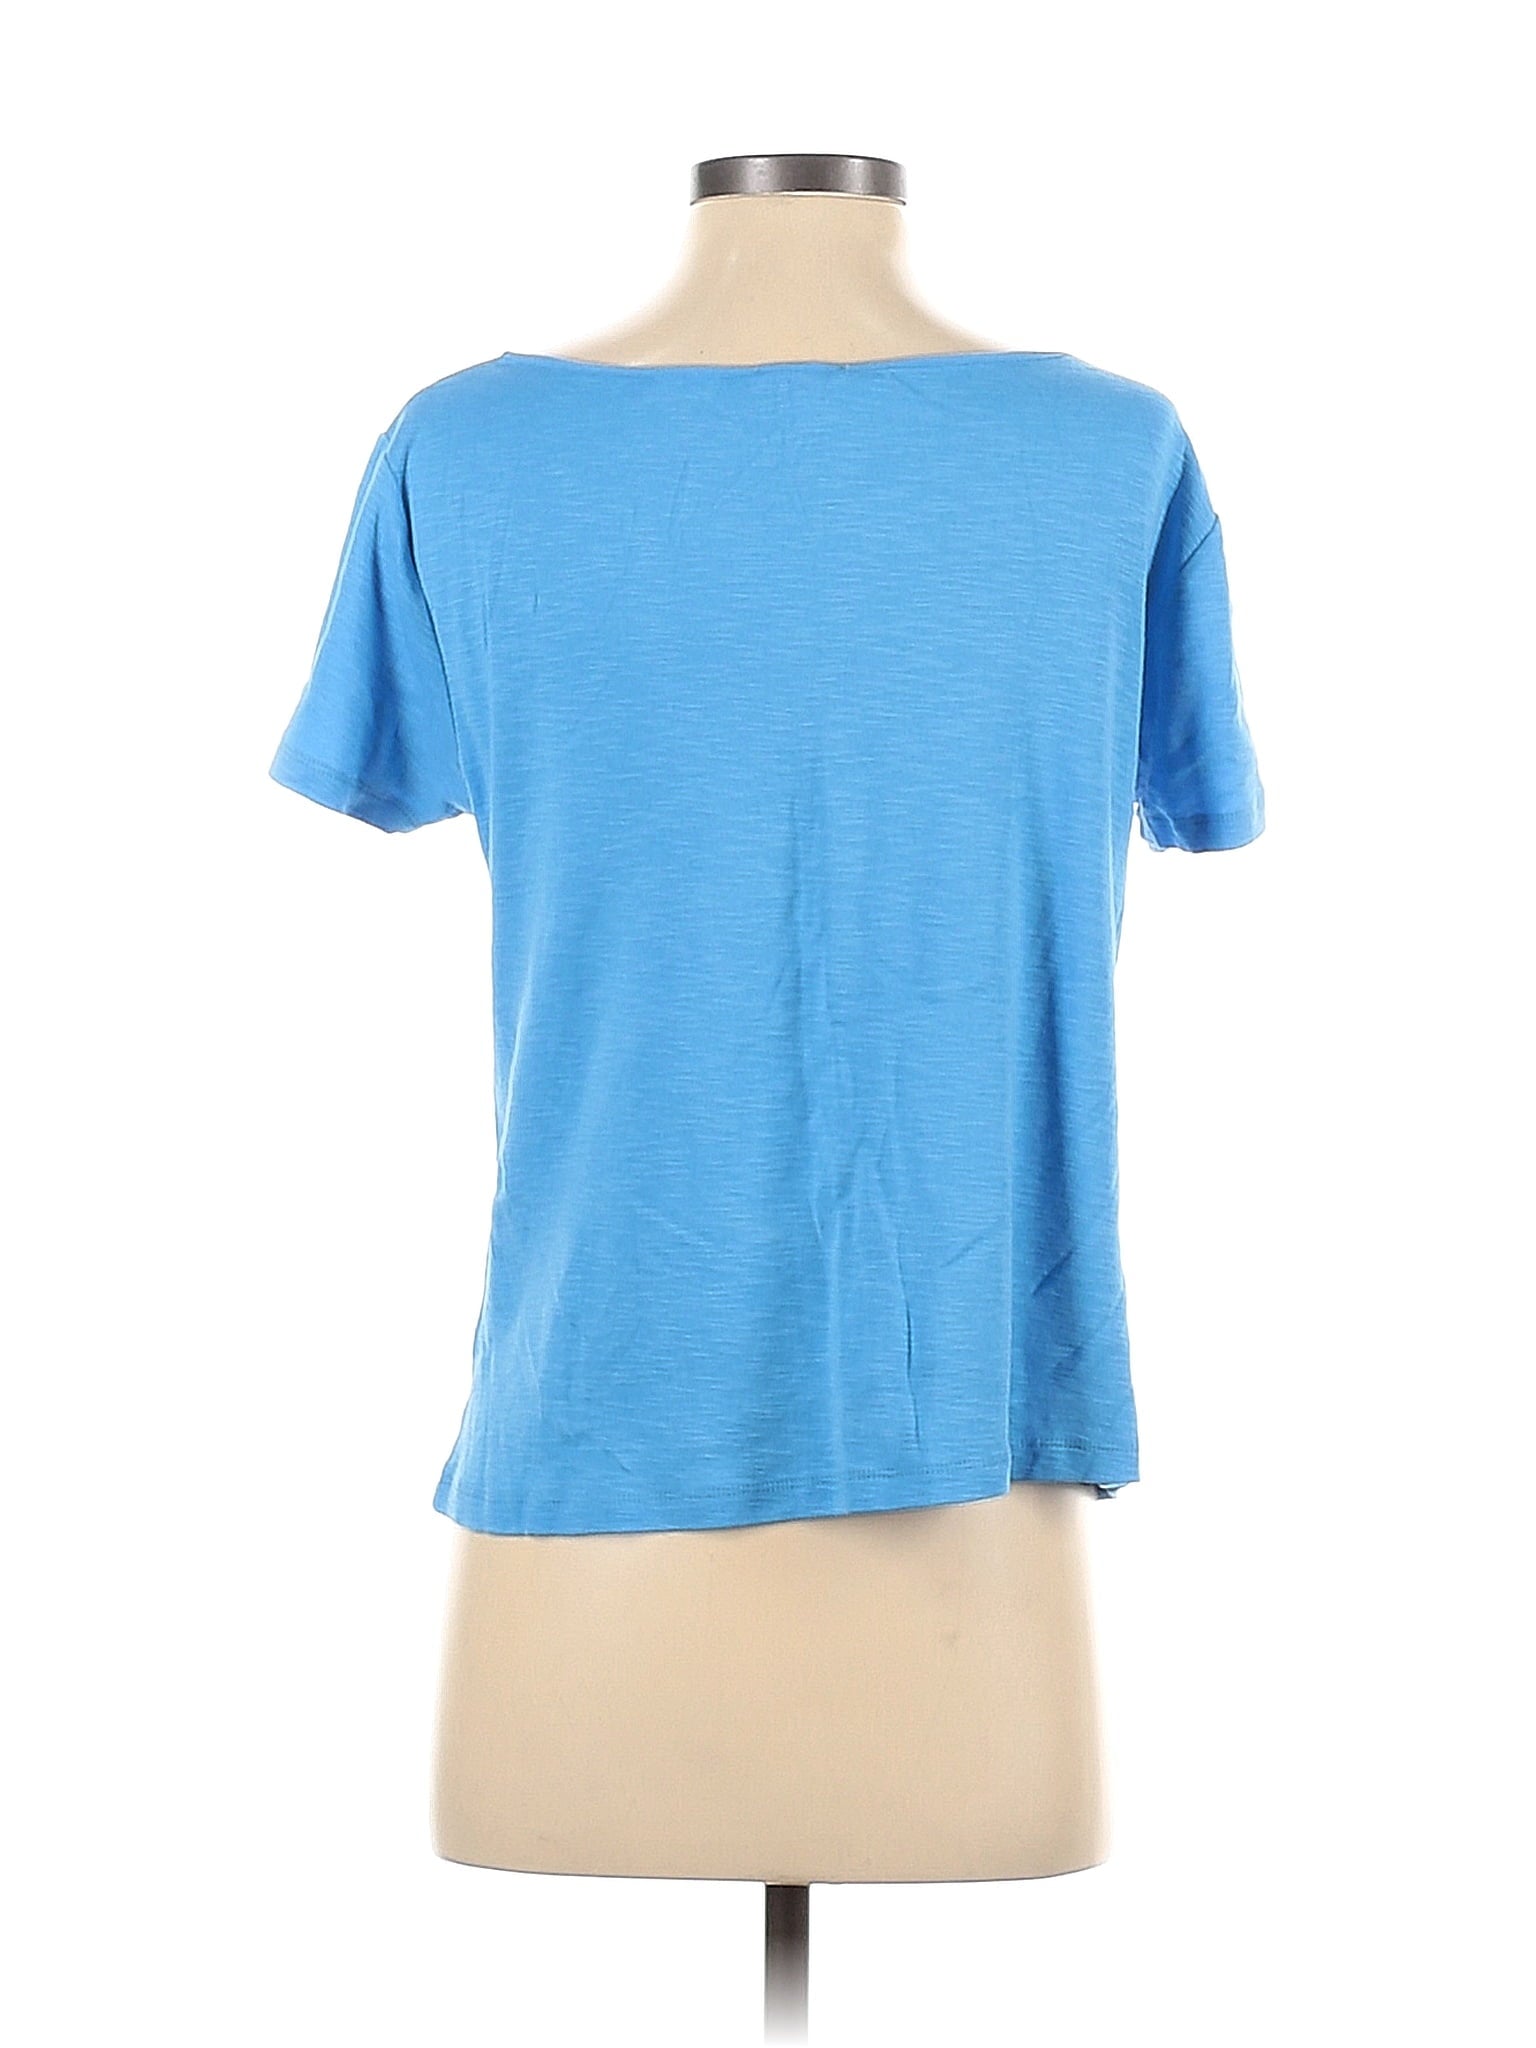 Short Sleeve Top size - M